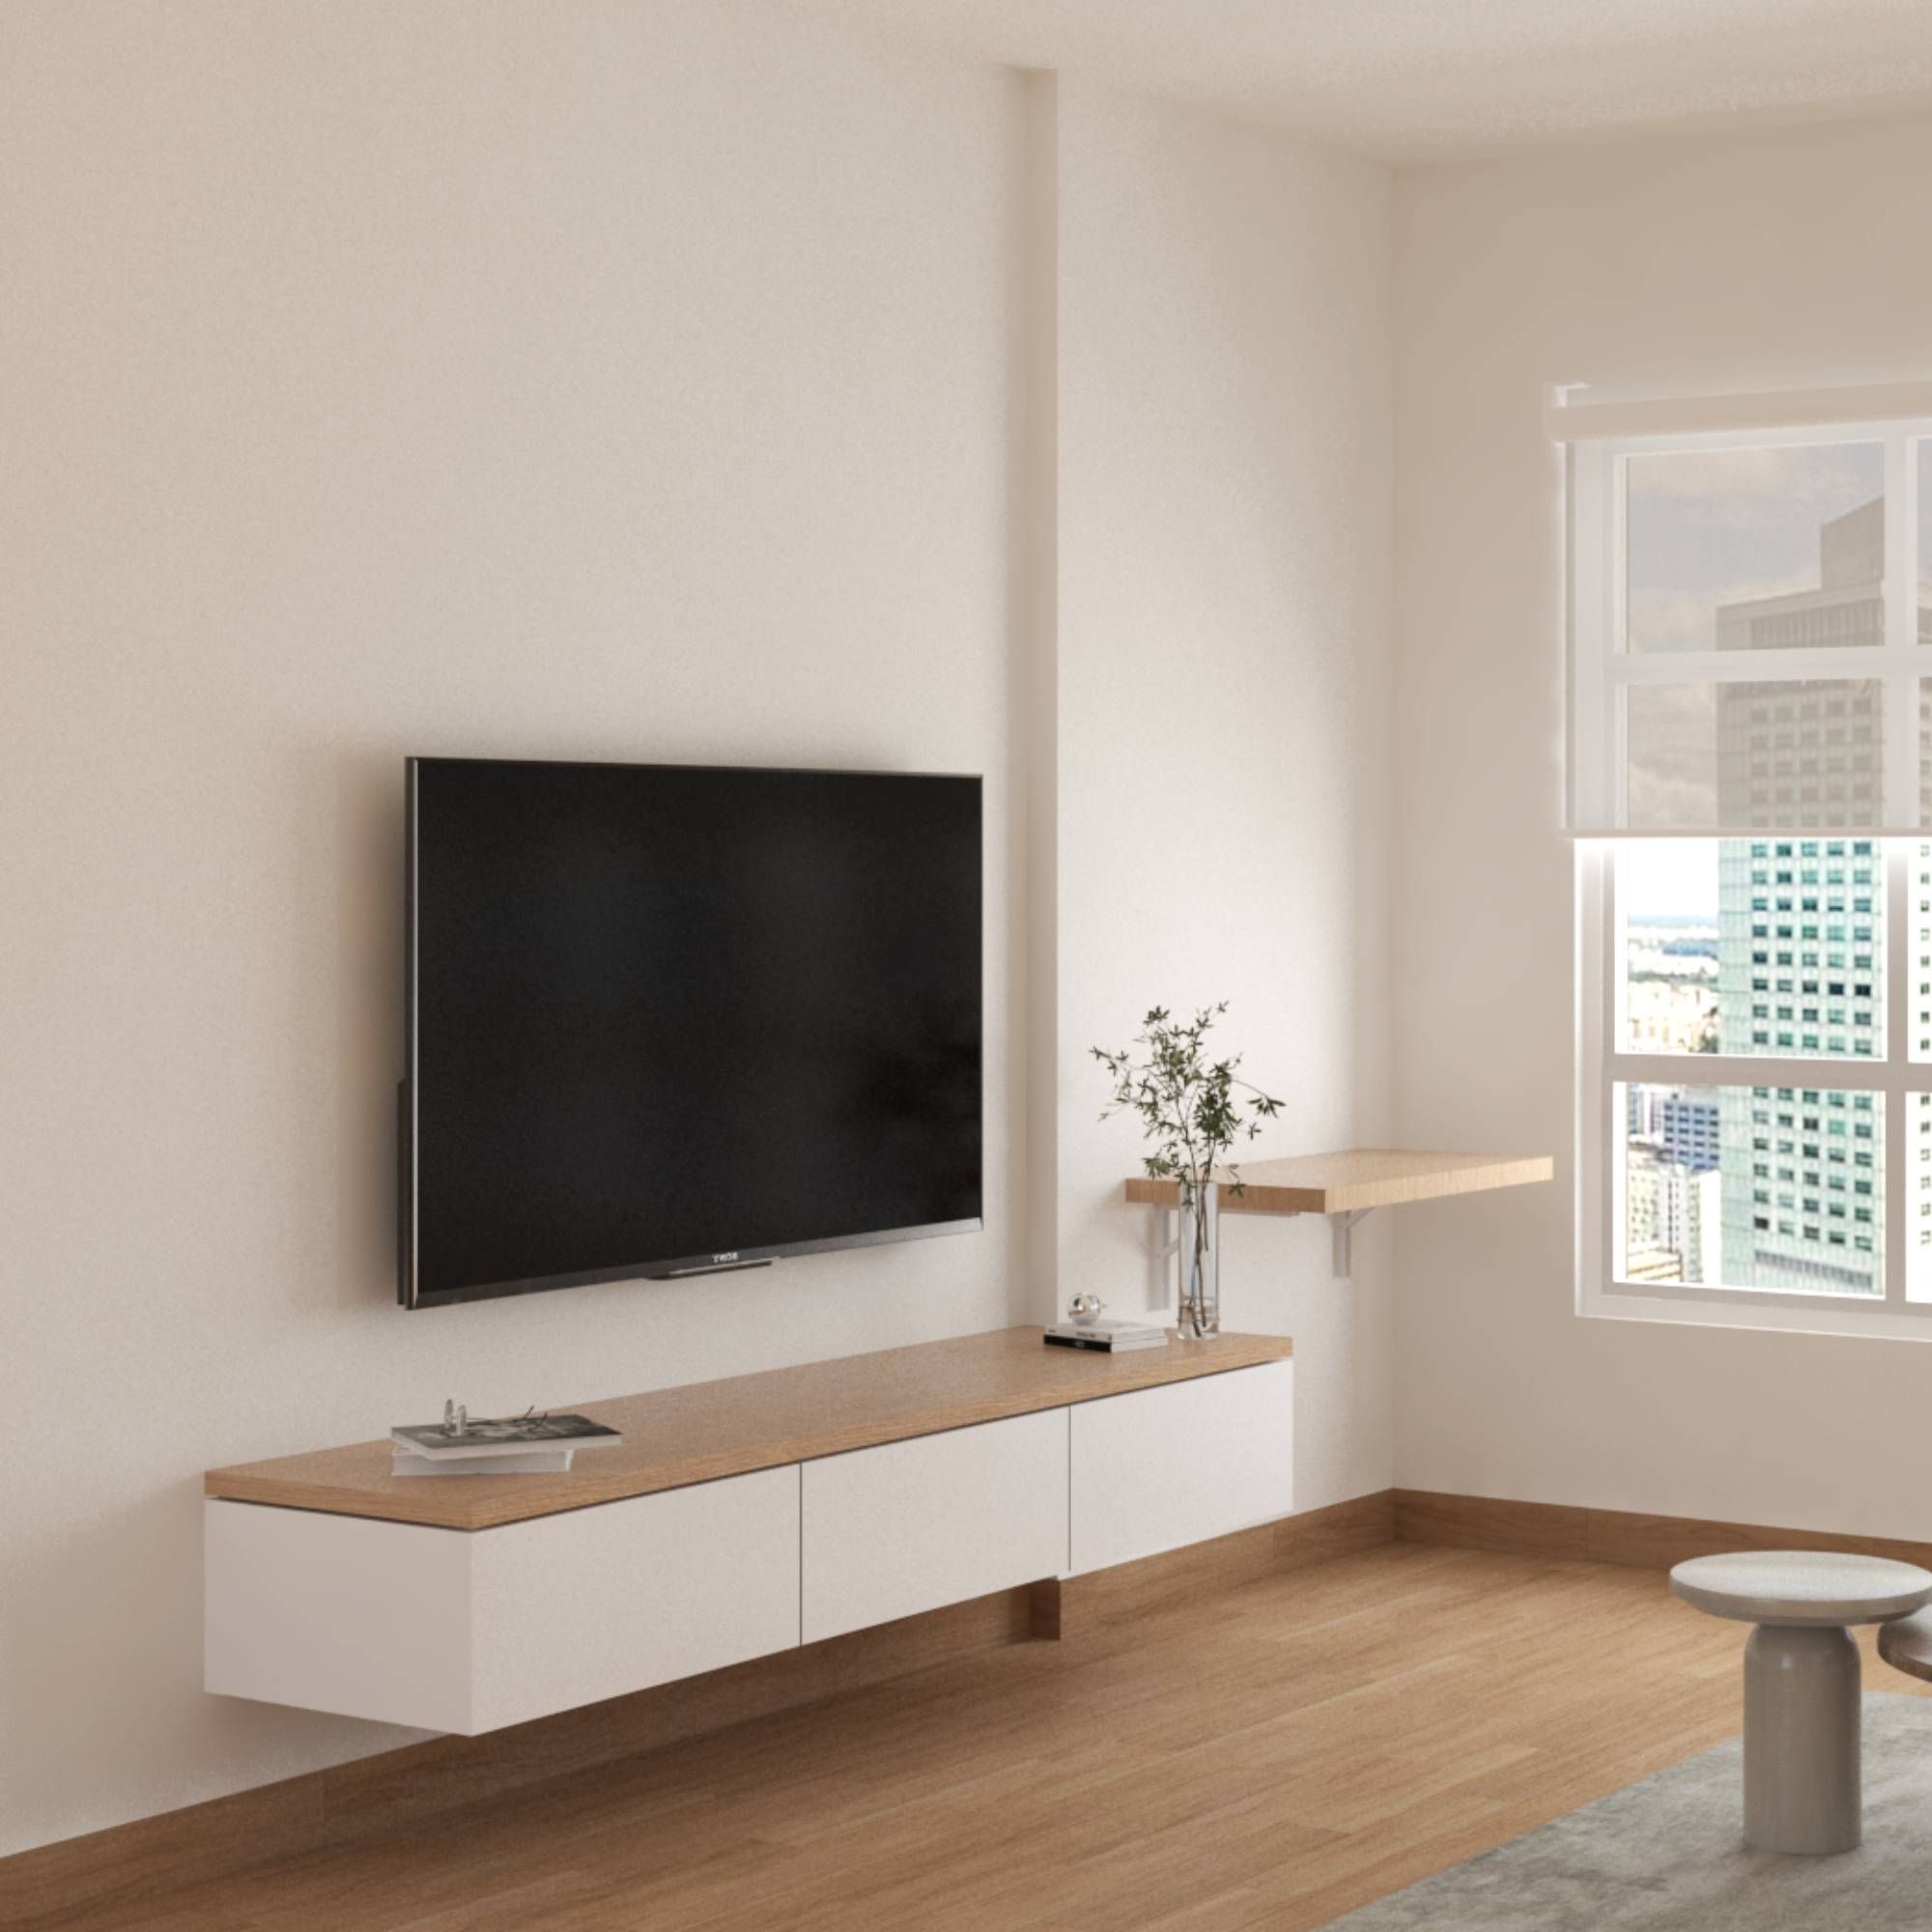 Wall-Mounted Minimal TV Unit Design With Closed Storage